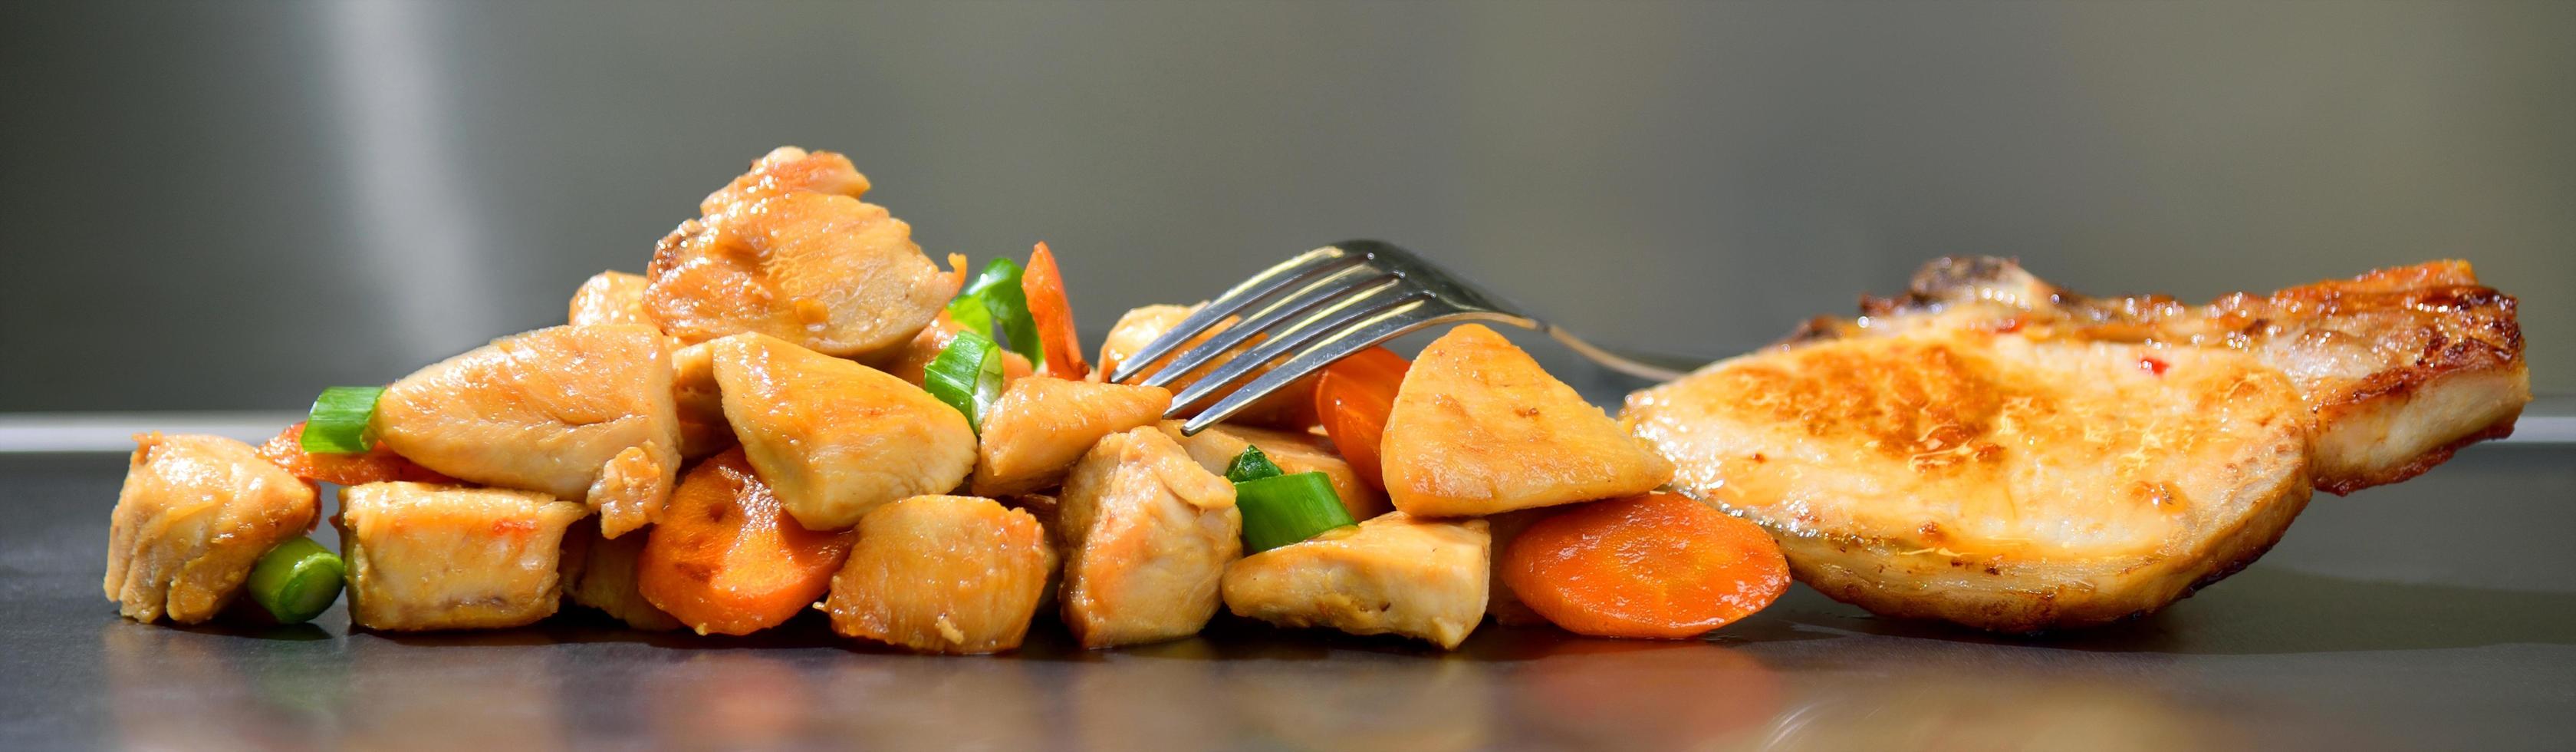 Roasted chicken seasoned slices with carrots and leeks on a stainless steel background photo